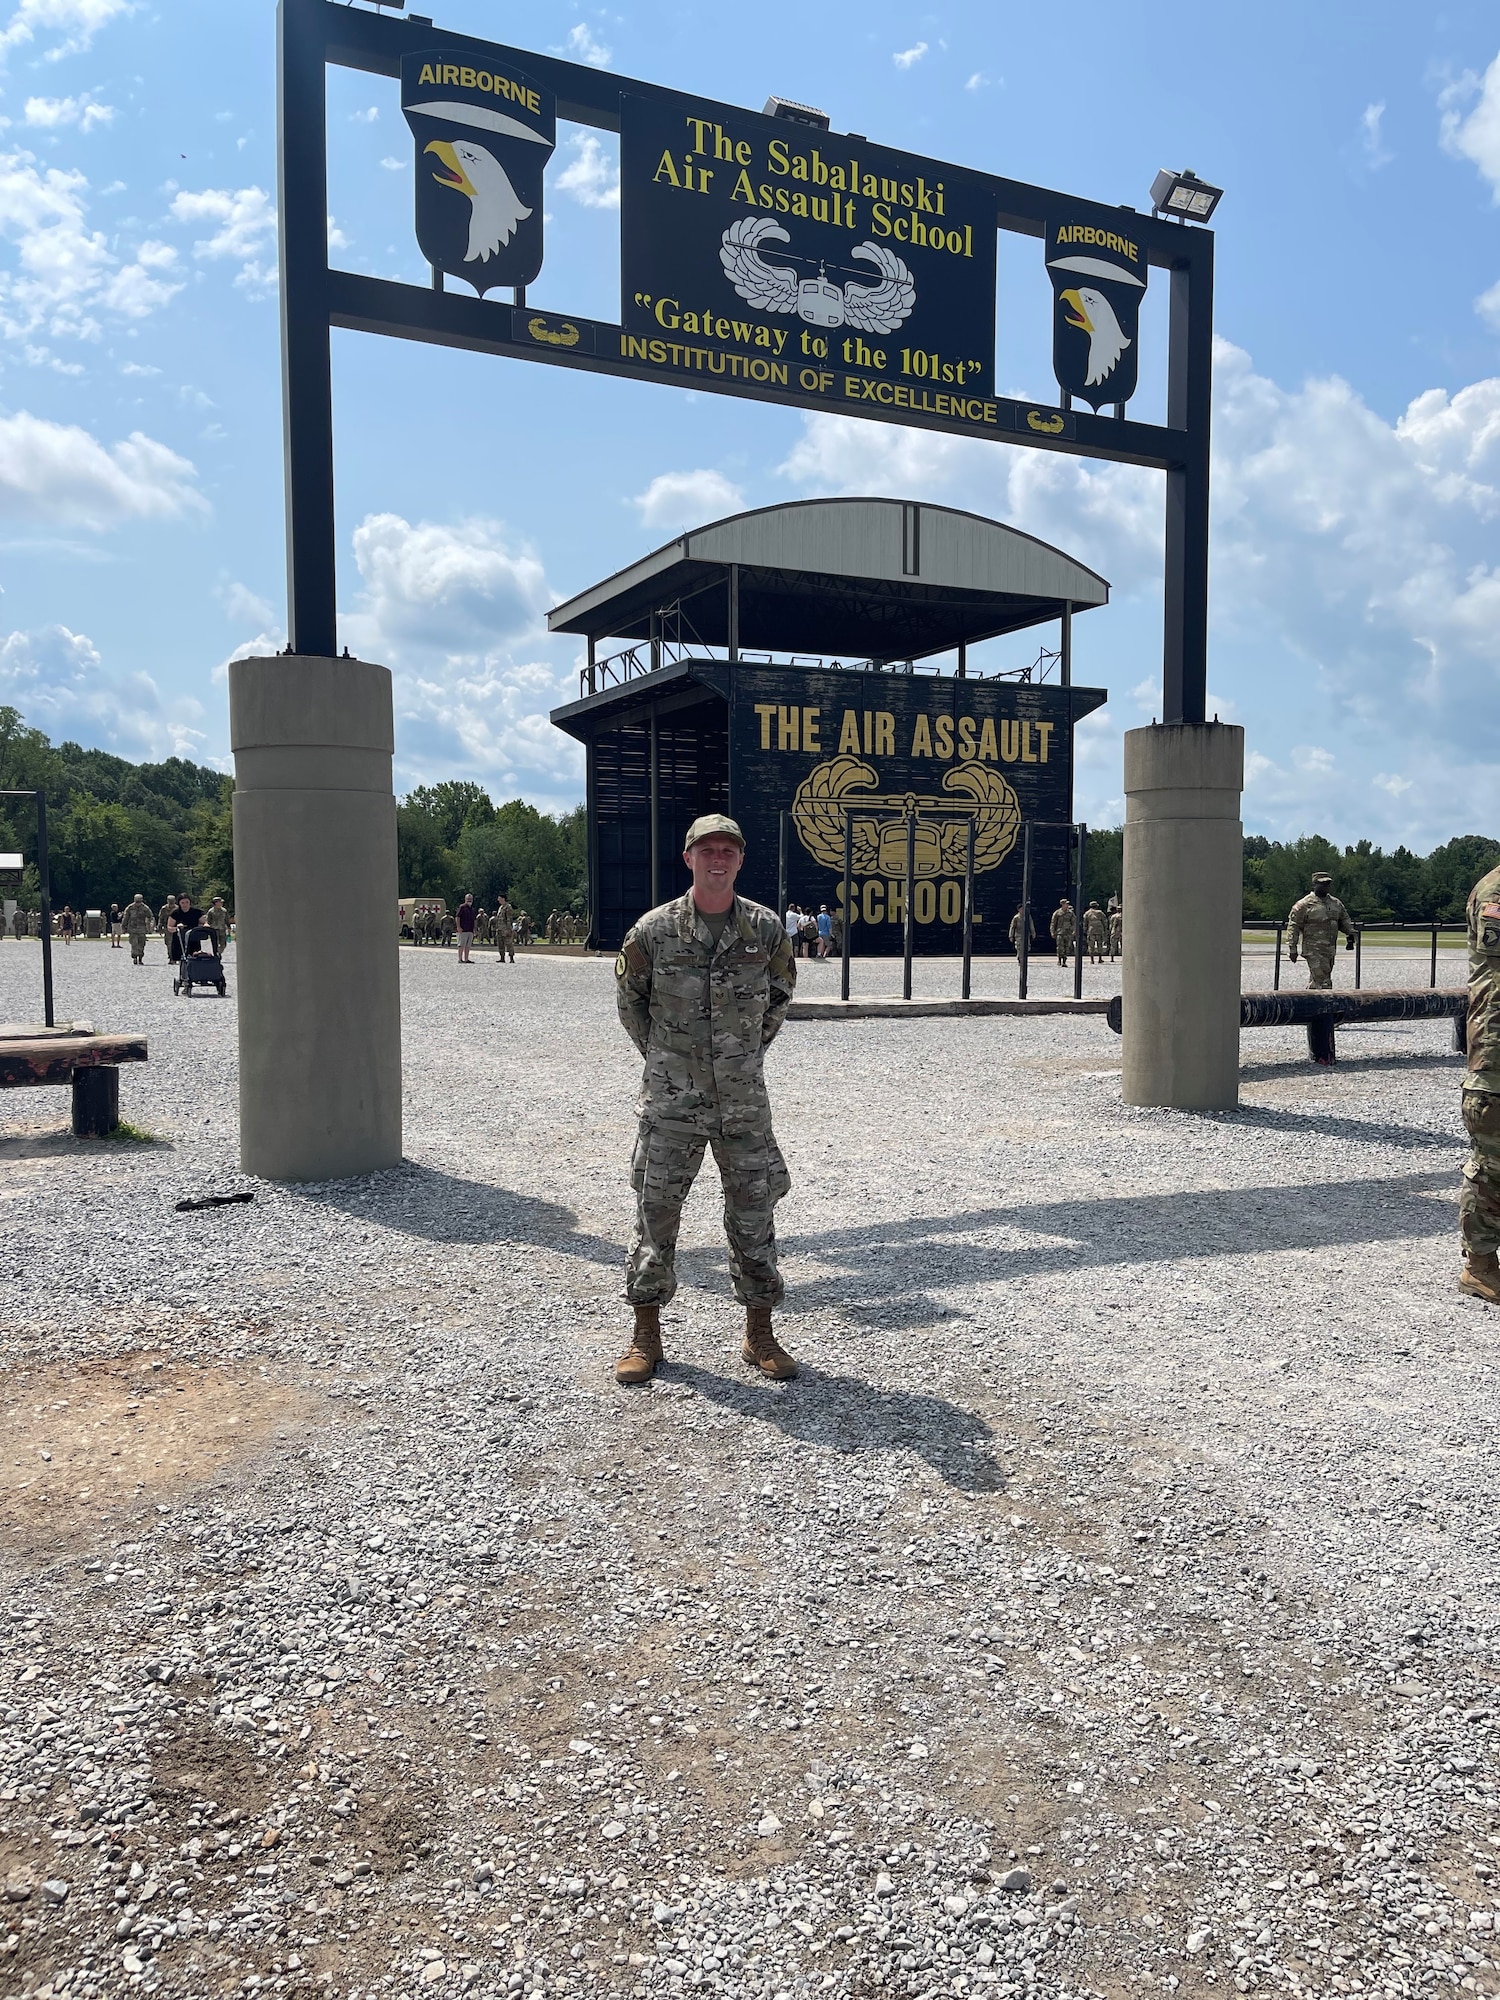 A photo of an Airman standing in front of the Army Air Assault School sign